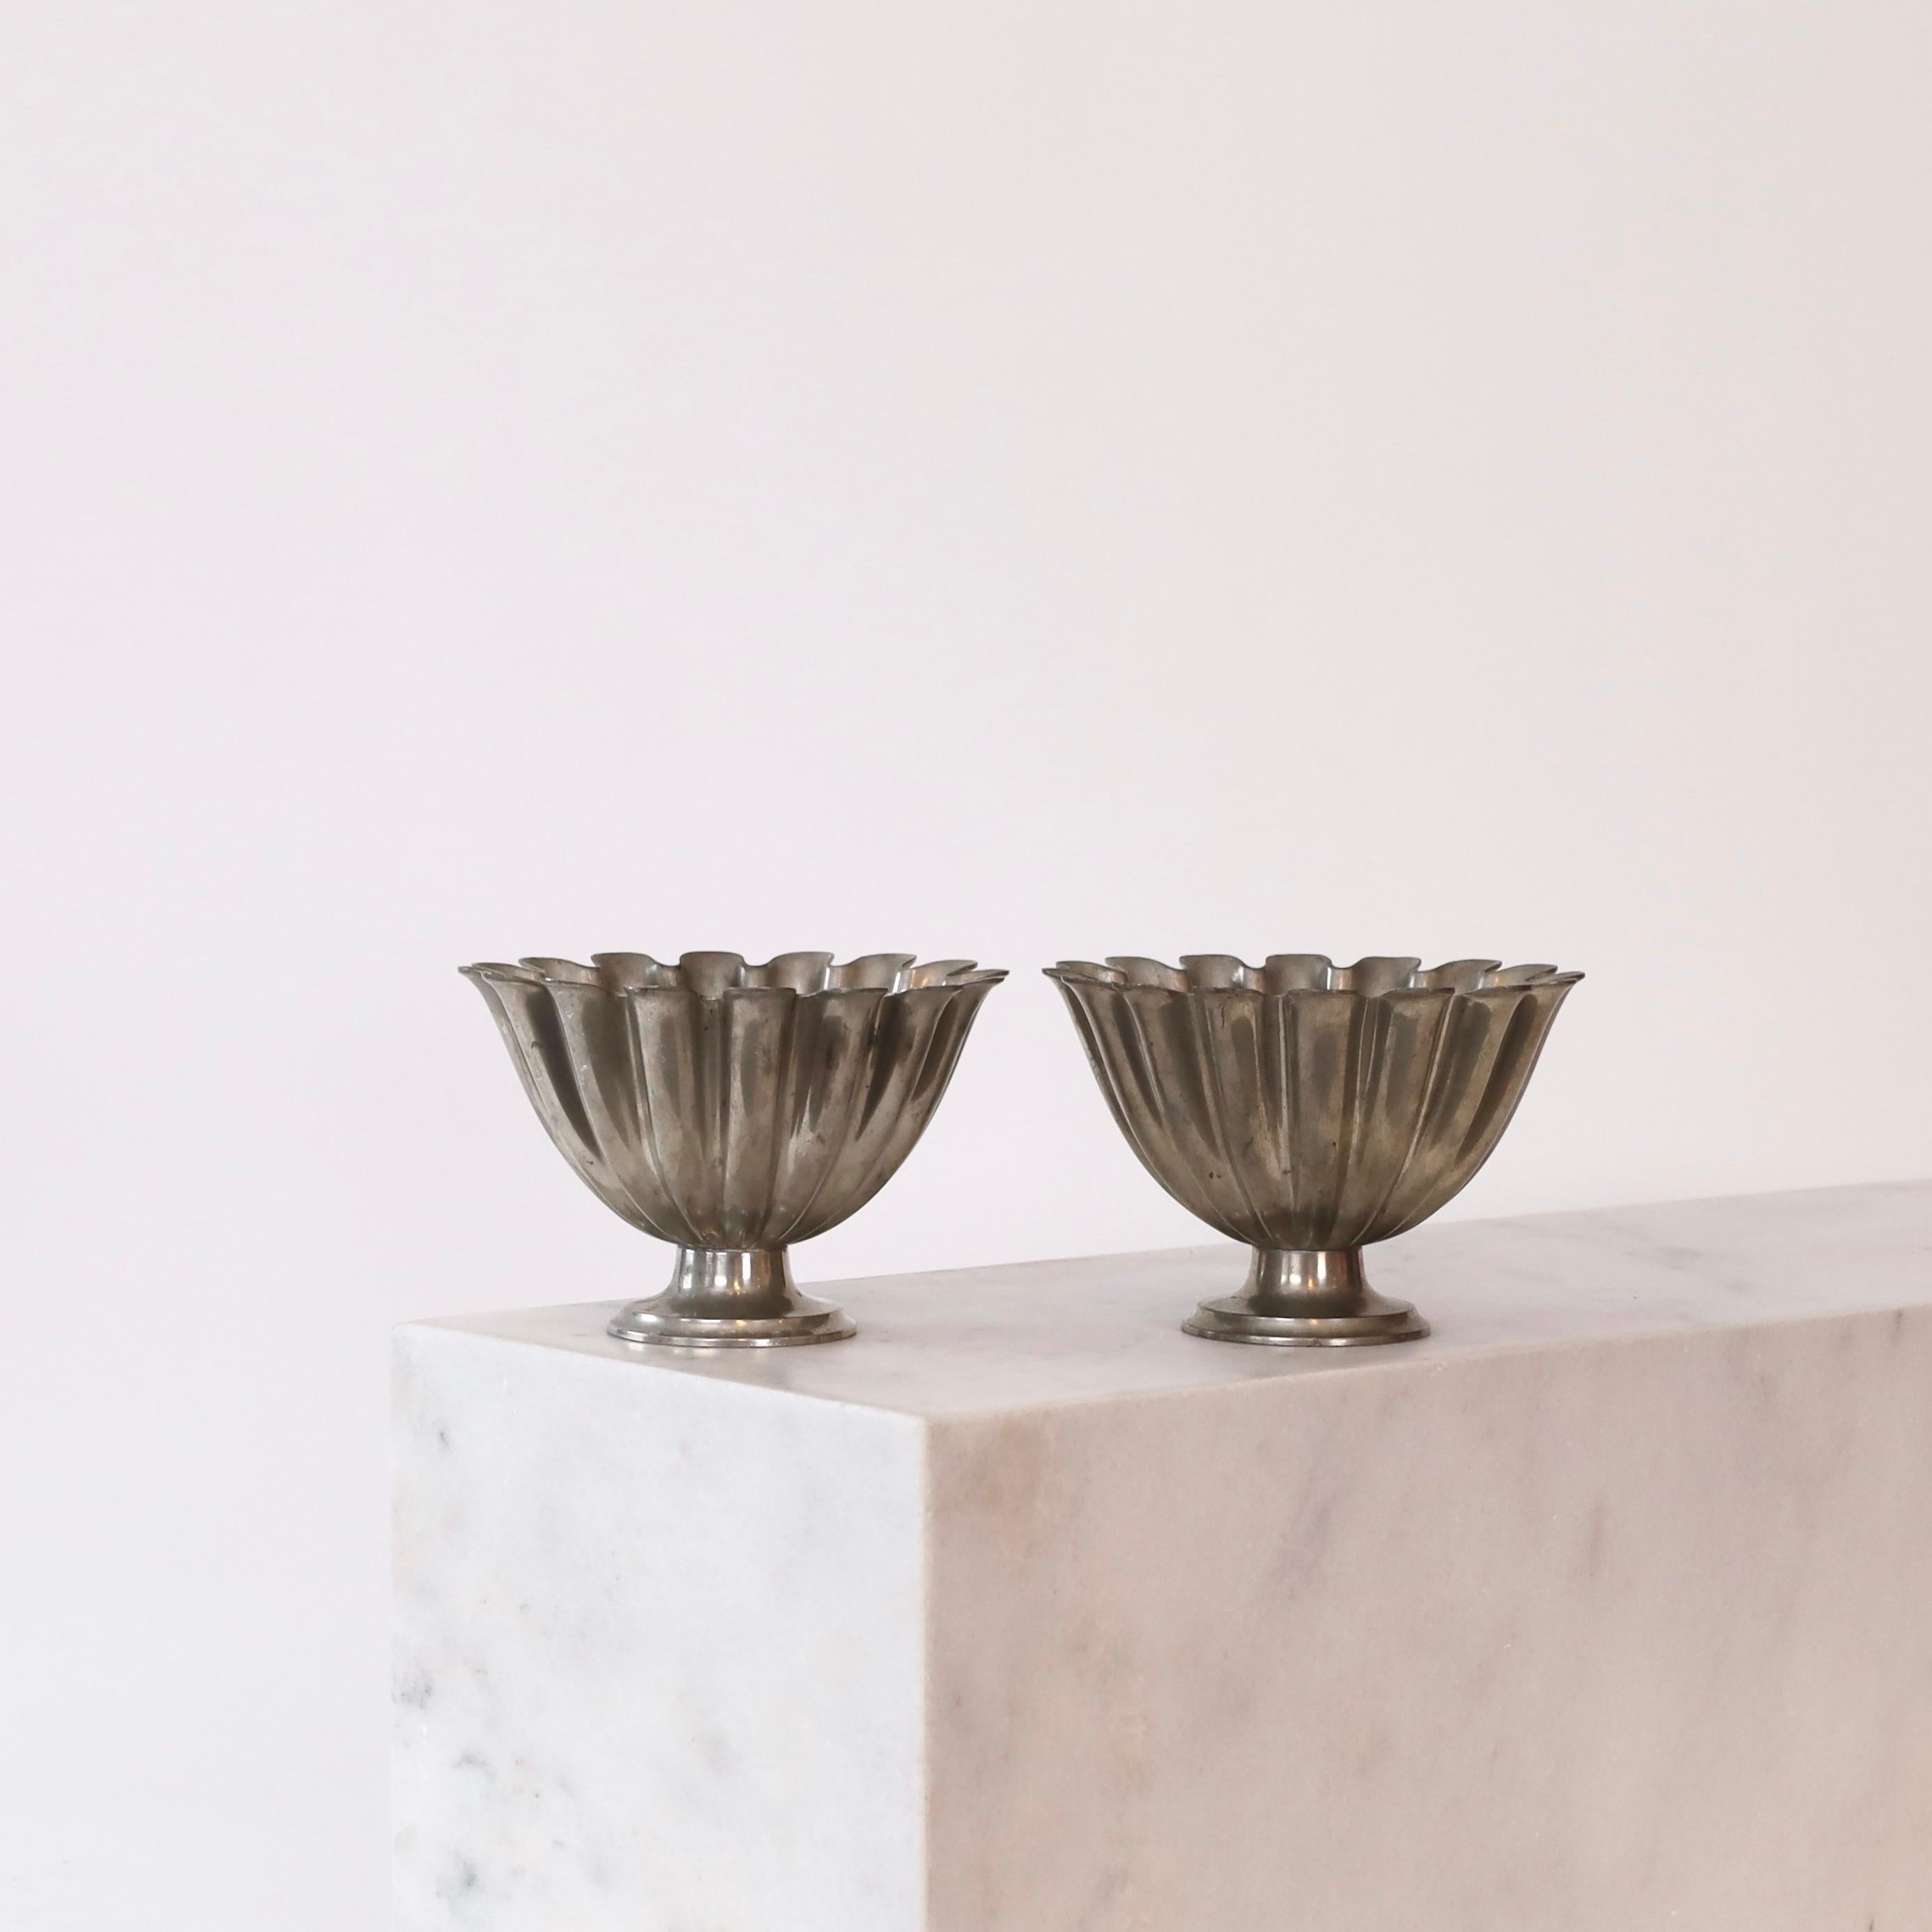 Pair of Scalloped pedestal pewter bowls designed by Just Andersen in the 1920s. A fine set for a beautiful home. 

* A pair (2) of round scalloped bowls on foot made in pewter 
* Designer: Just Andersen
* Model: 1228
* Year: 1918-1929
* Condition: